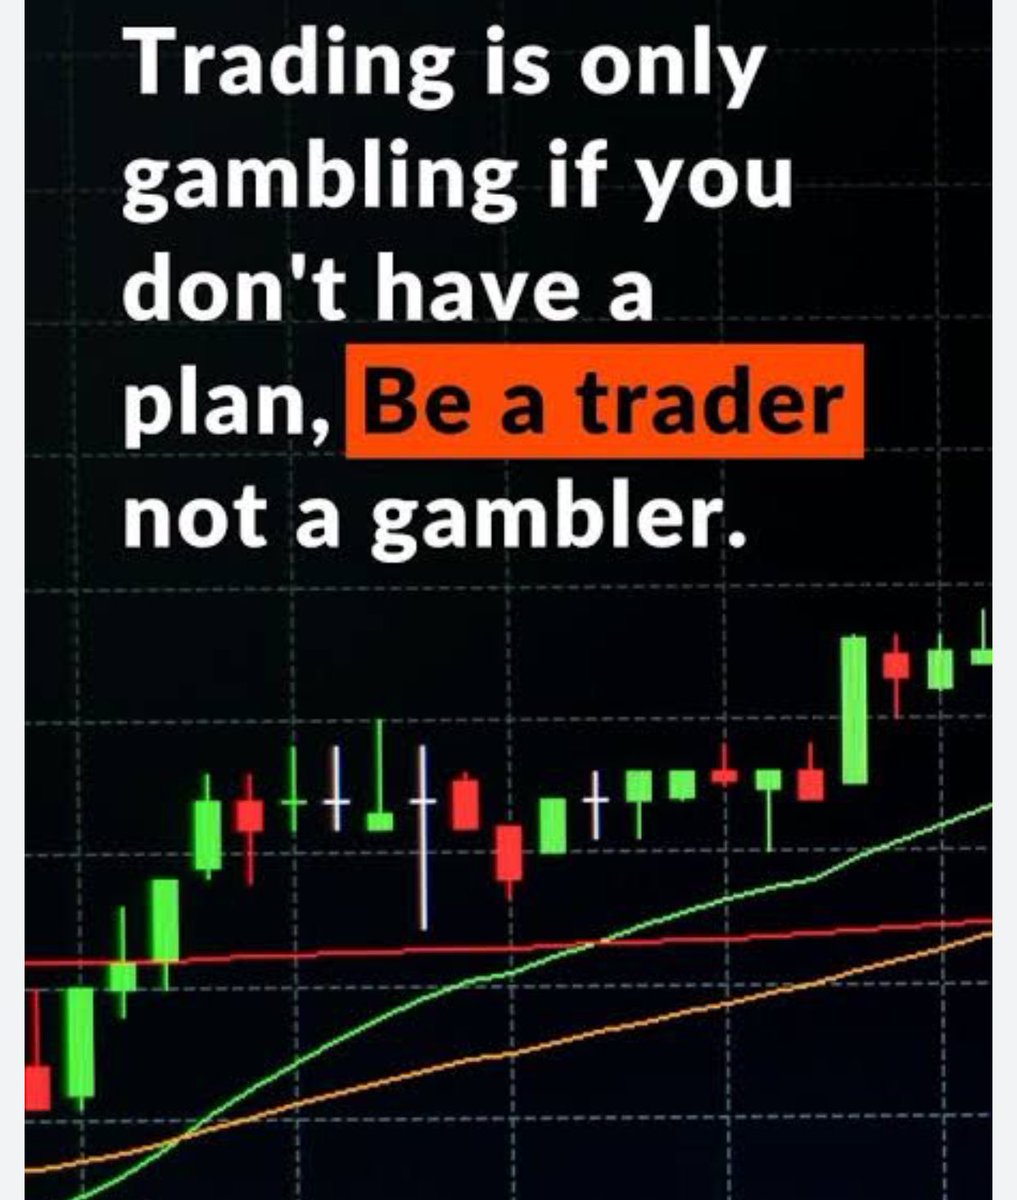 Many forex traders are just anxious to get right into trading with no regard for their total account size. They simply determine how much they can stomach to lose in a single trade and hit the trade button. This is called gambling.❌ It’s not hard to trade. What is hard is the